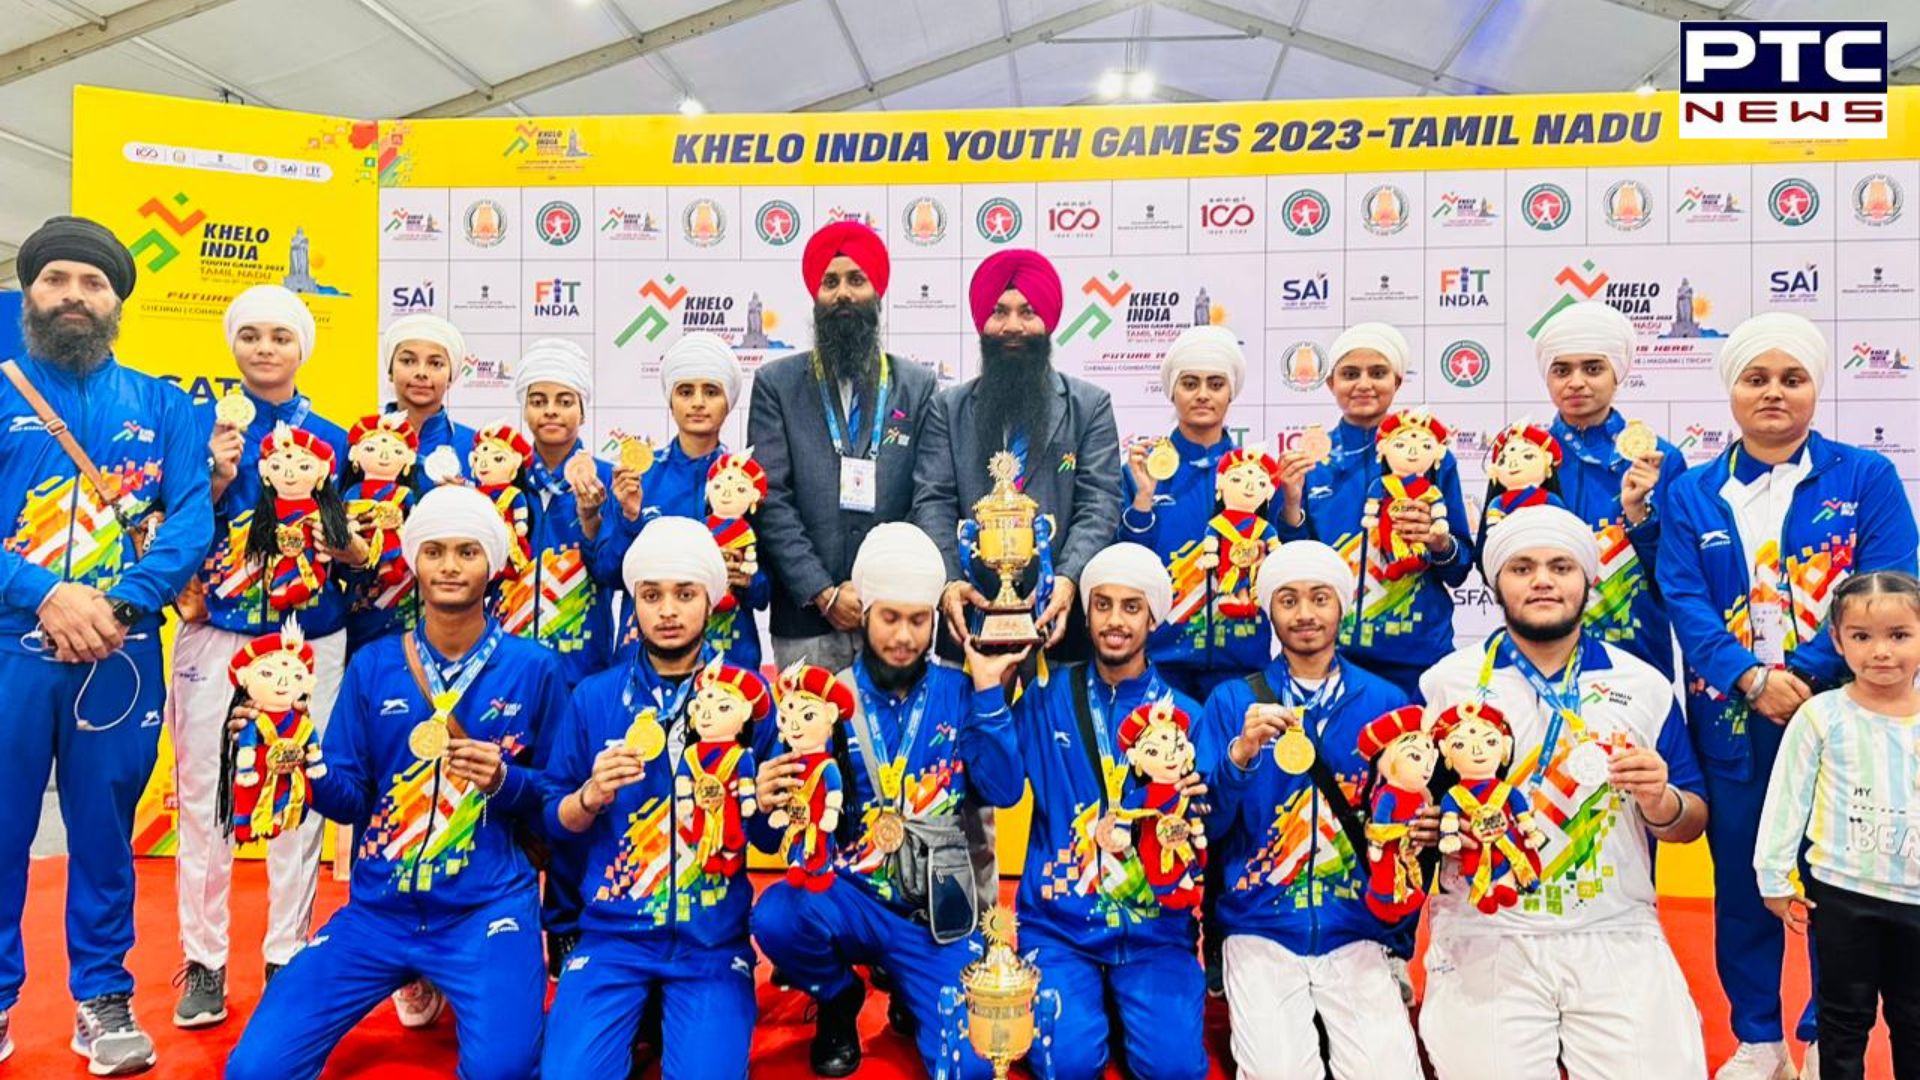 Punjab’s Gatka team wins big in Khelo India Youth Games; lifts 4 gold, 2 silver & 3 bronze